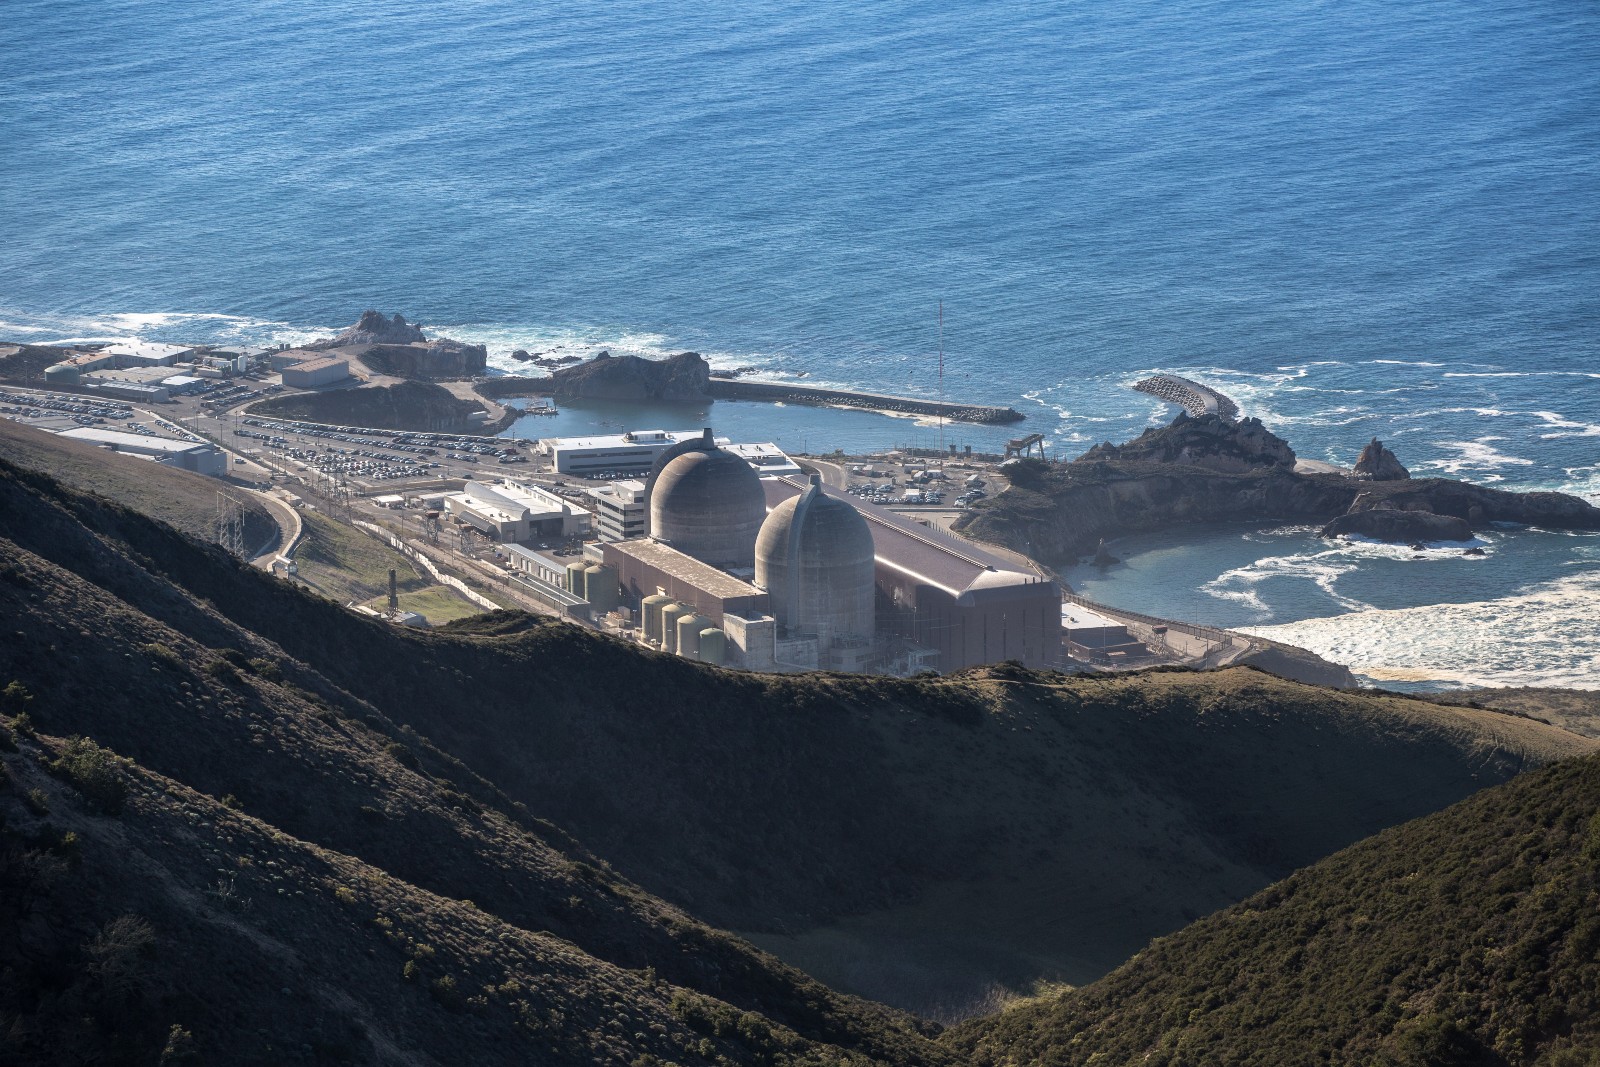 Diablo Canyon is the only operational nuclear plant left in California. It is operated by Pacific Gas & Electric (PG&E).